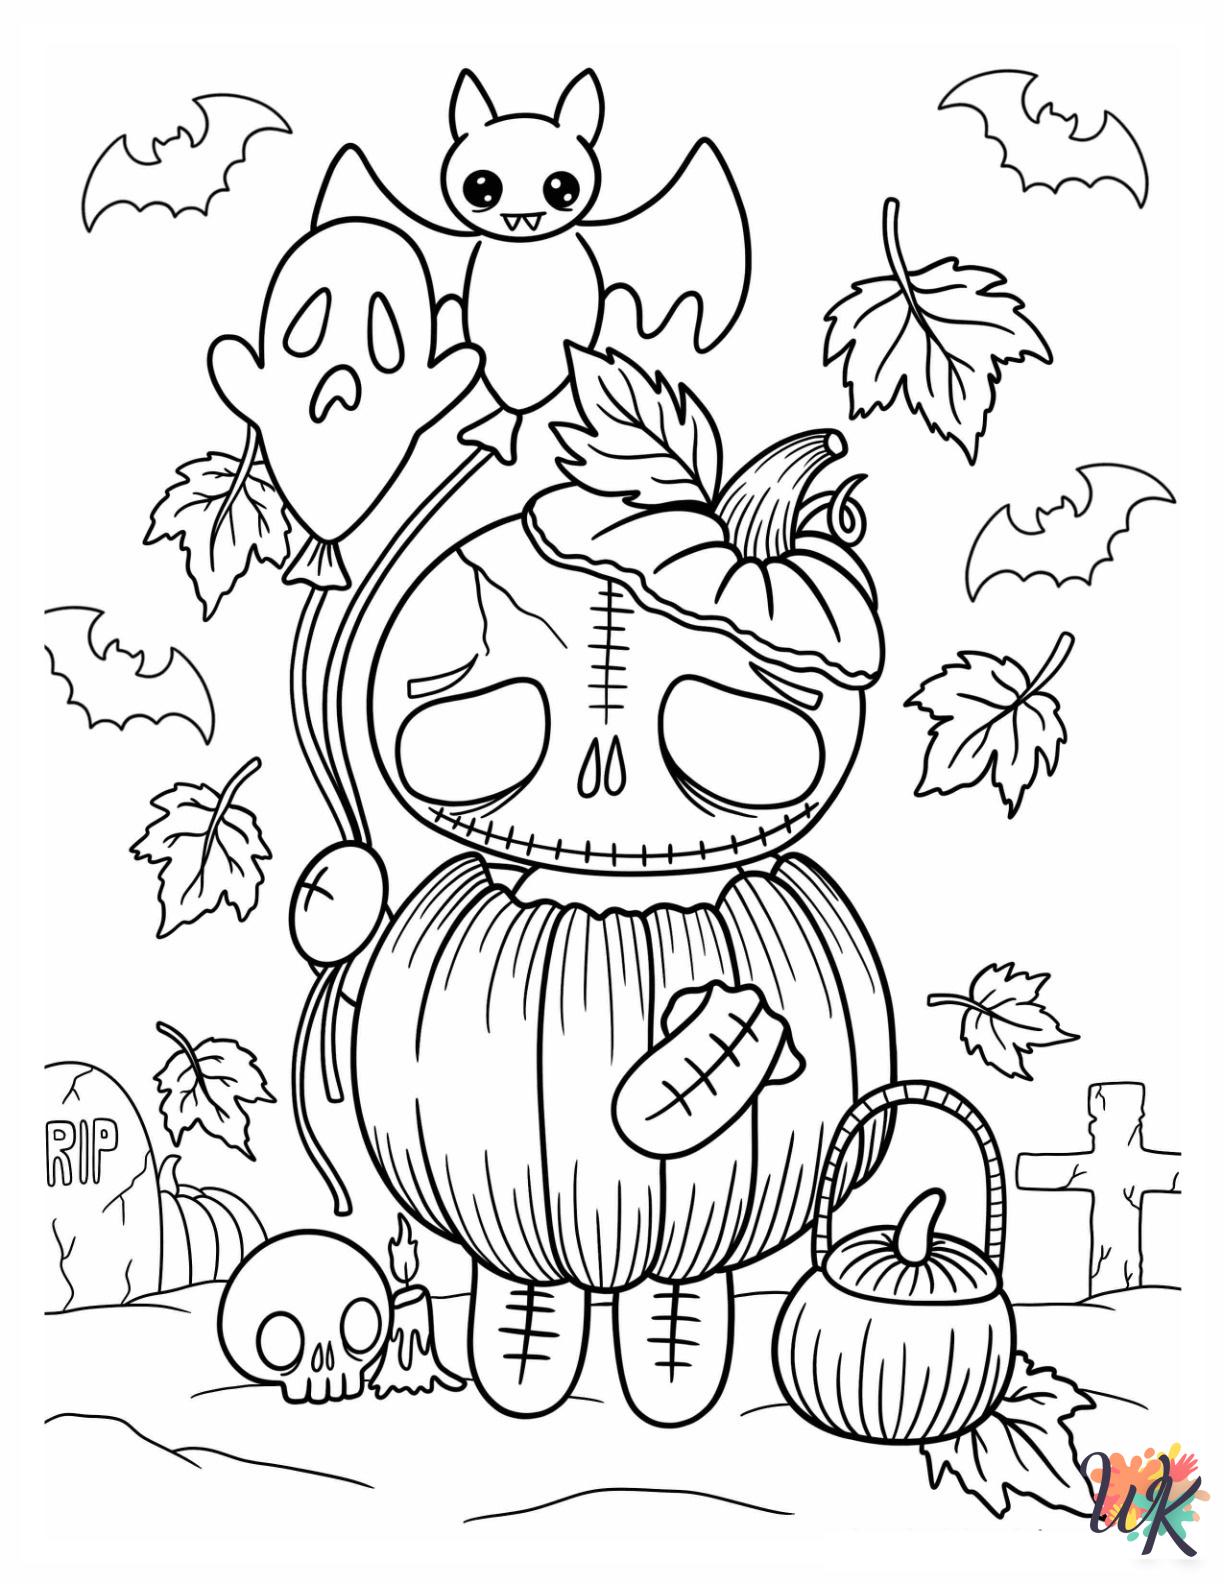 Skeleton Coloring Pages 17